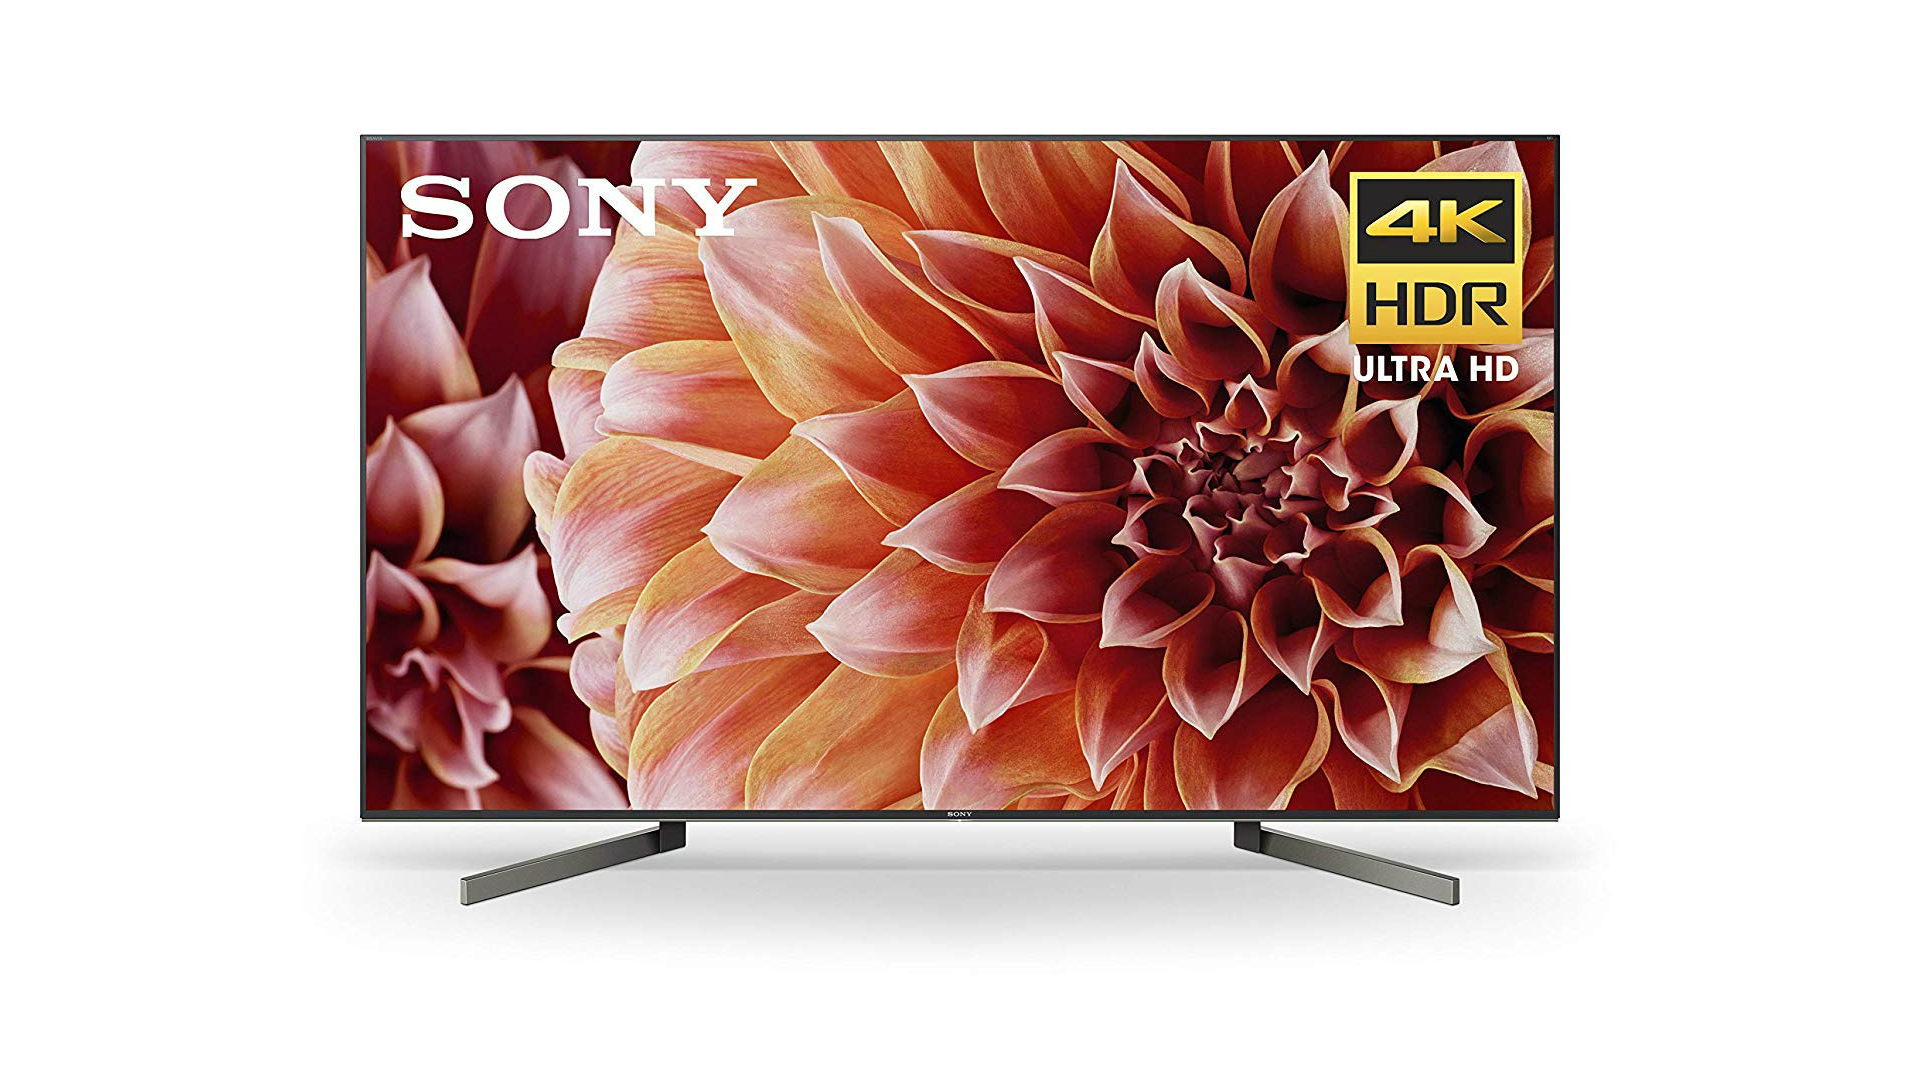 Sony X900F - one of the best 75-inch tvs